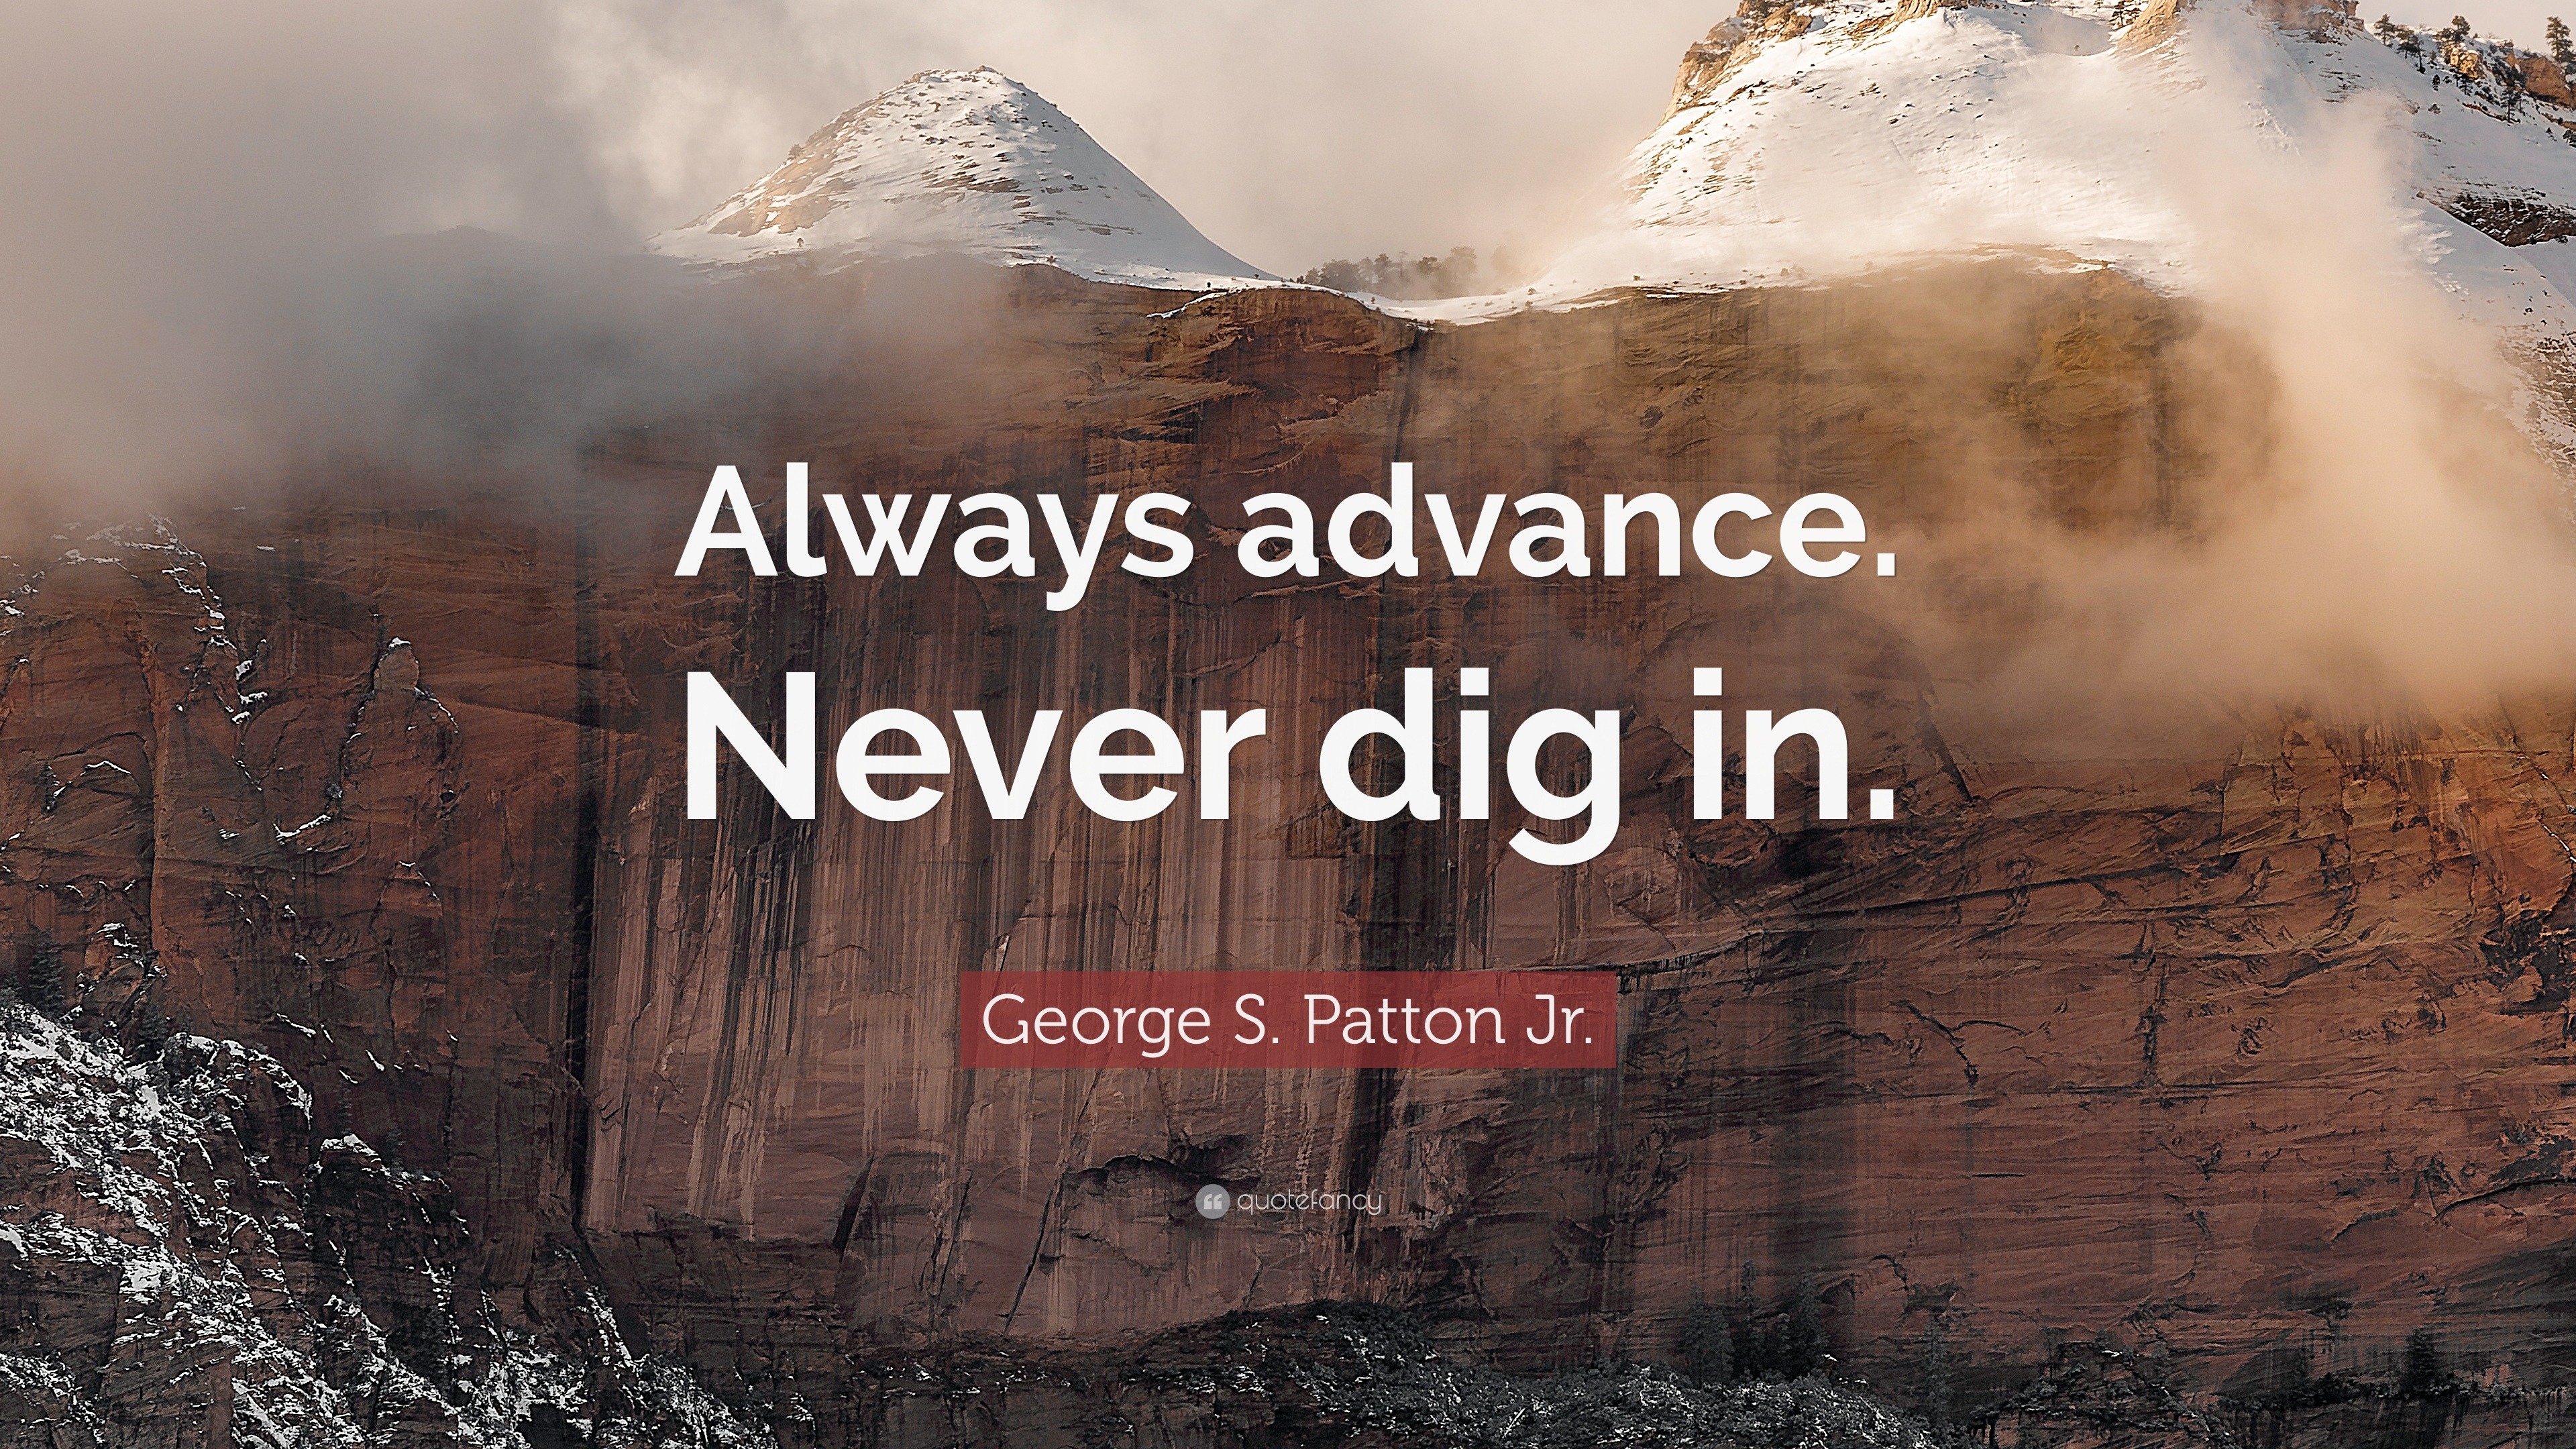 George S. Patton Jr. Quote: “Always advance. Never dig in.”